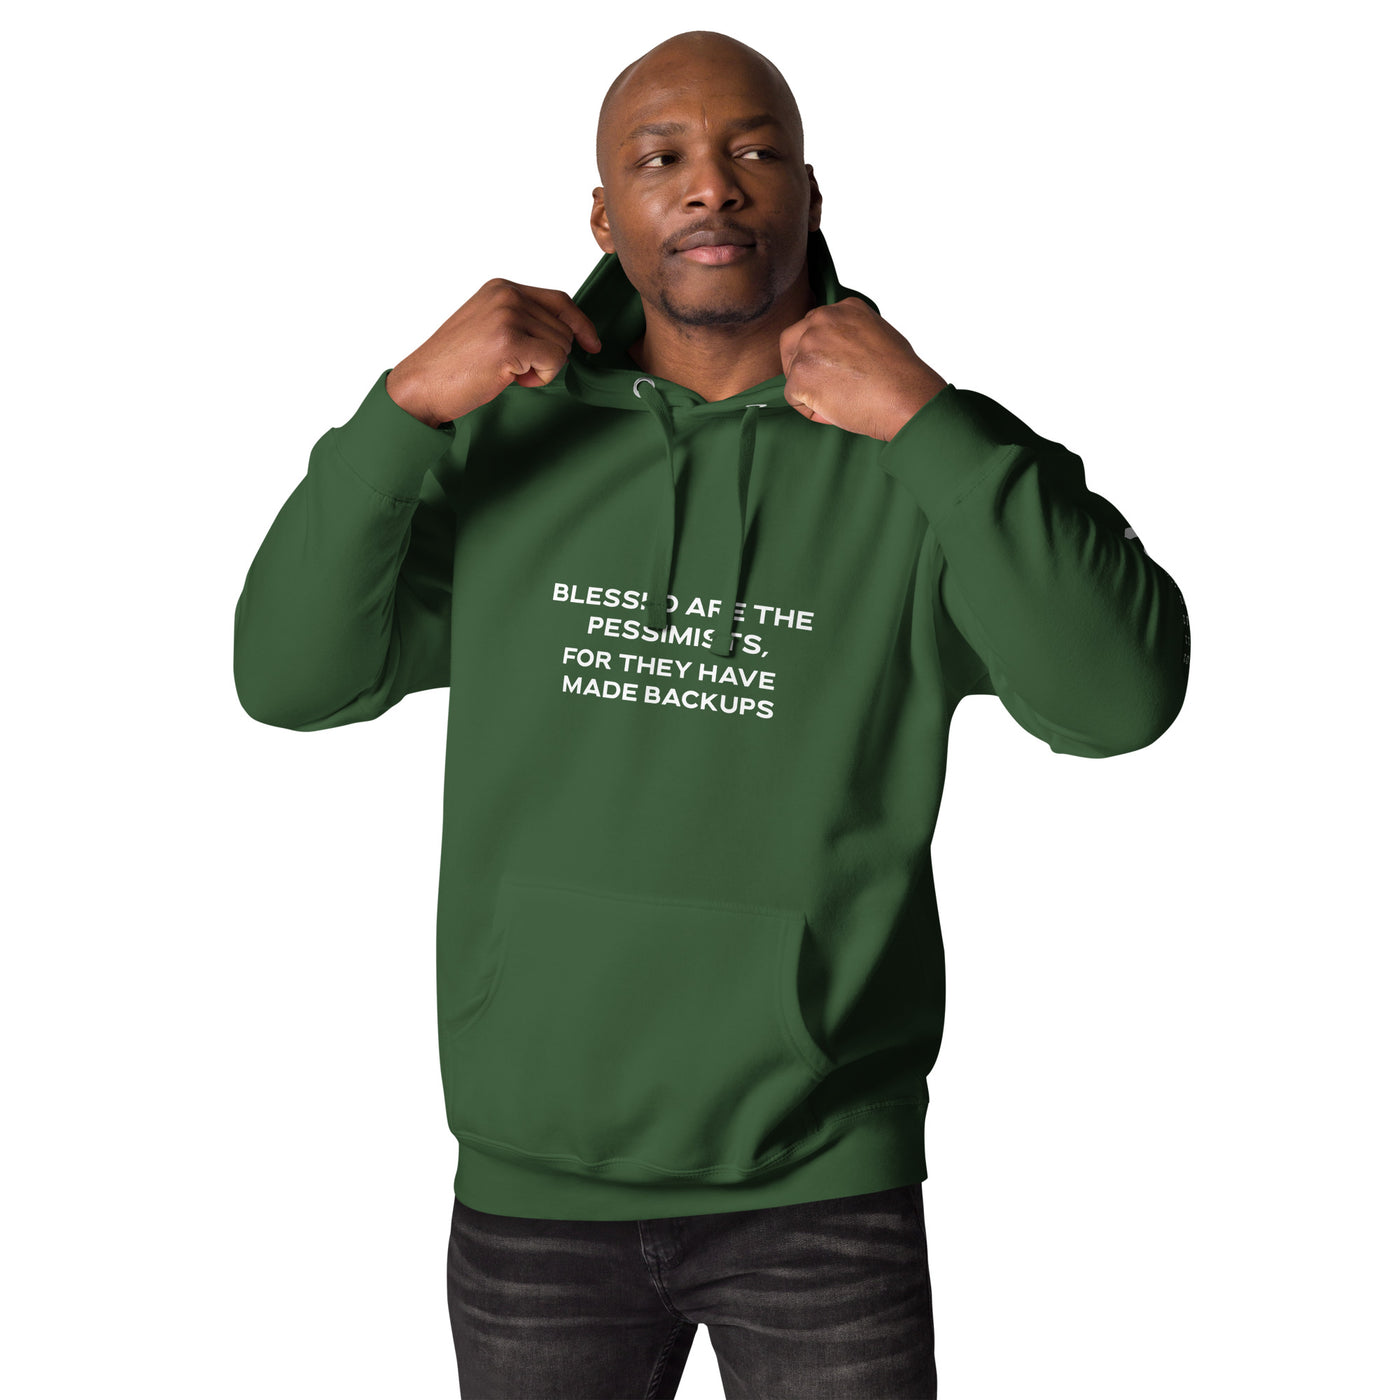 Blessed are the pessimists for they have made backups V2 - Unisex Hoodie